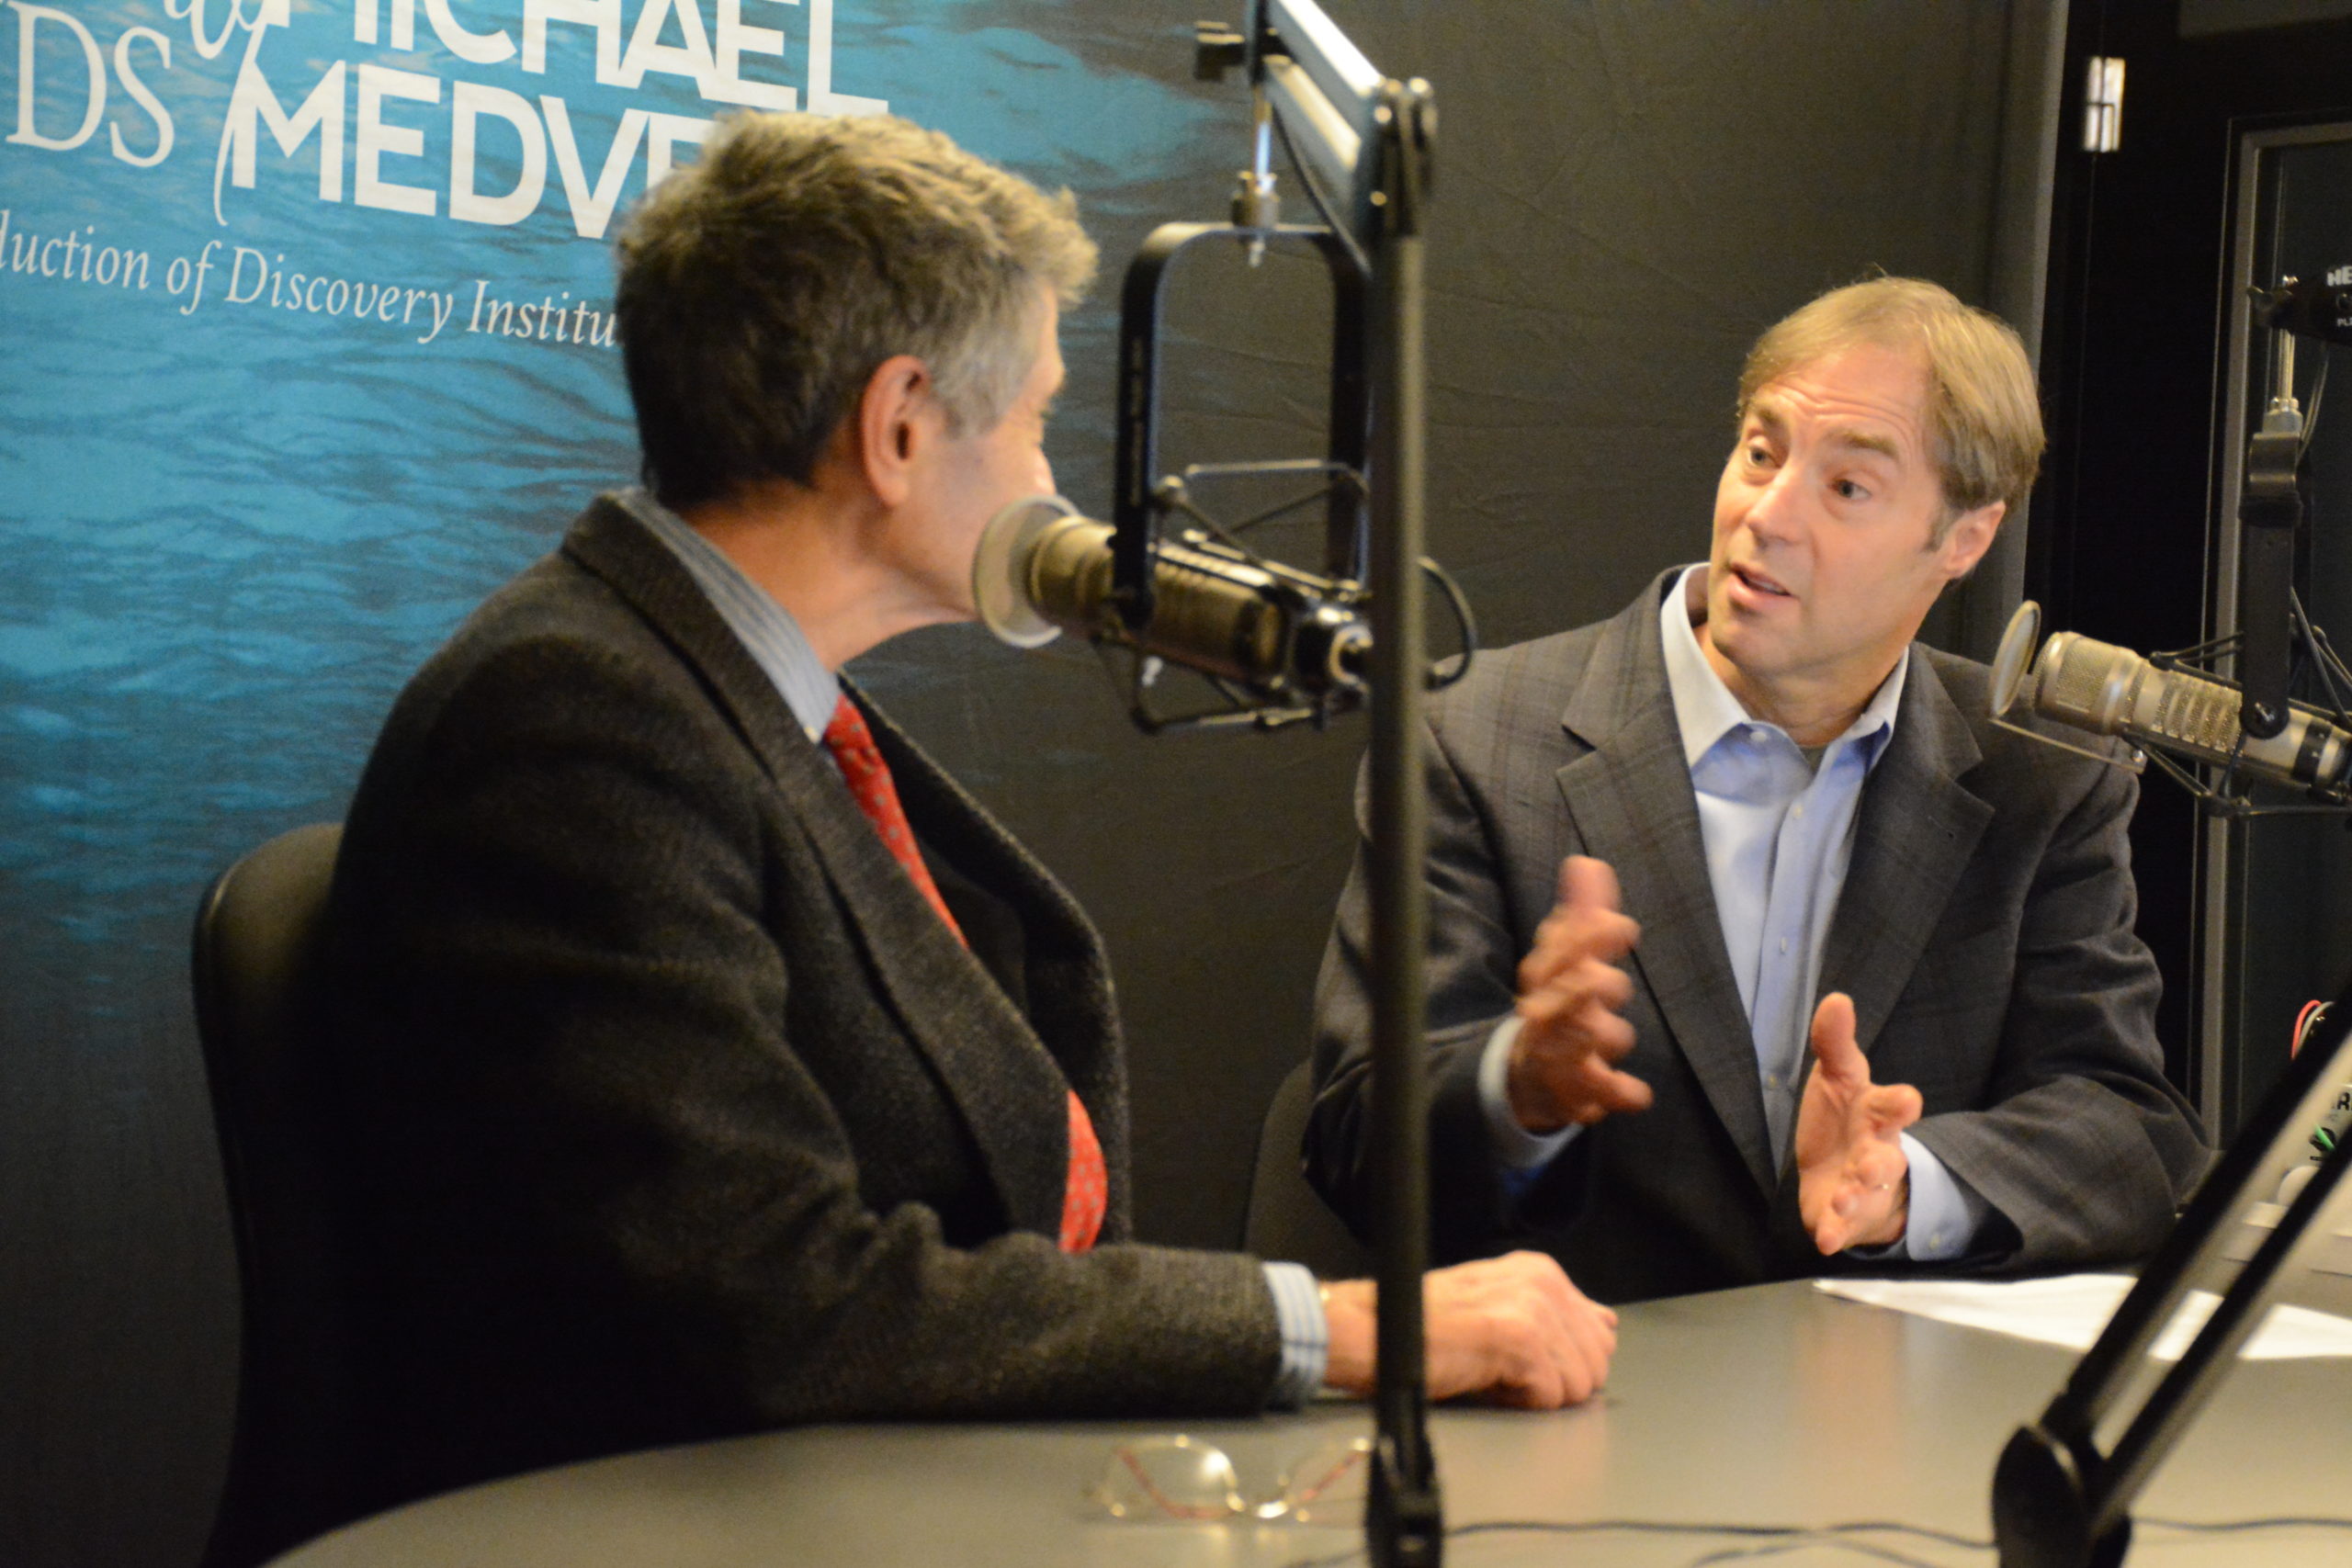 Stephen Meyer with Michael Medved